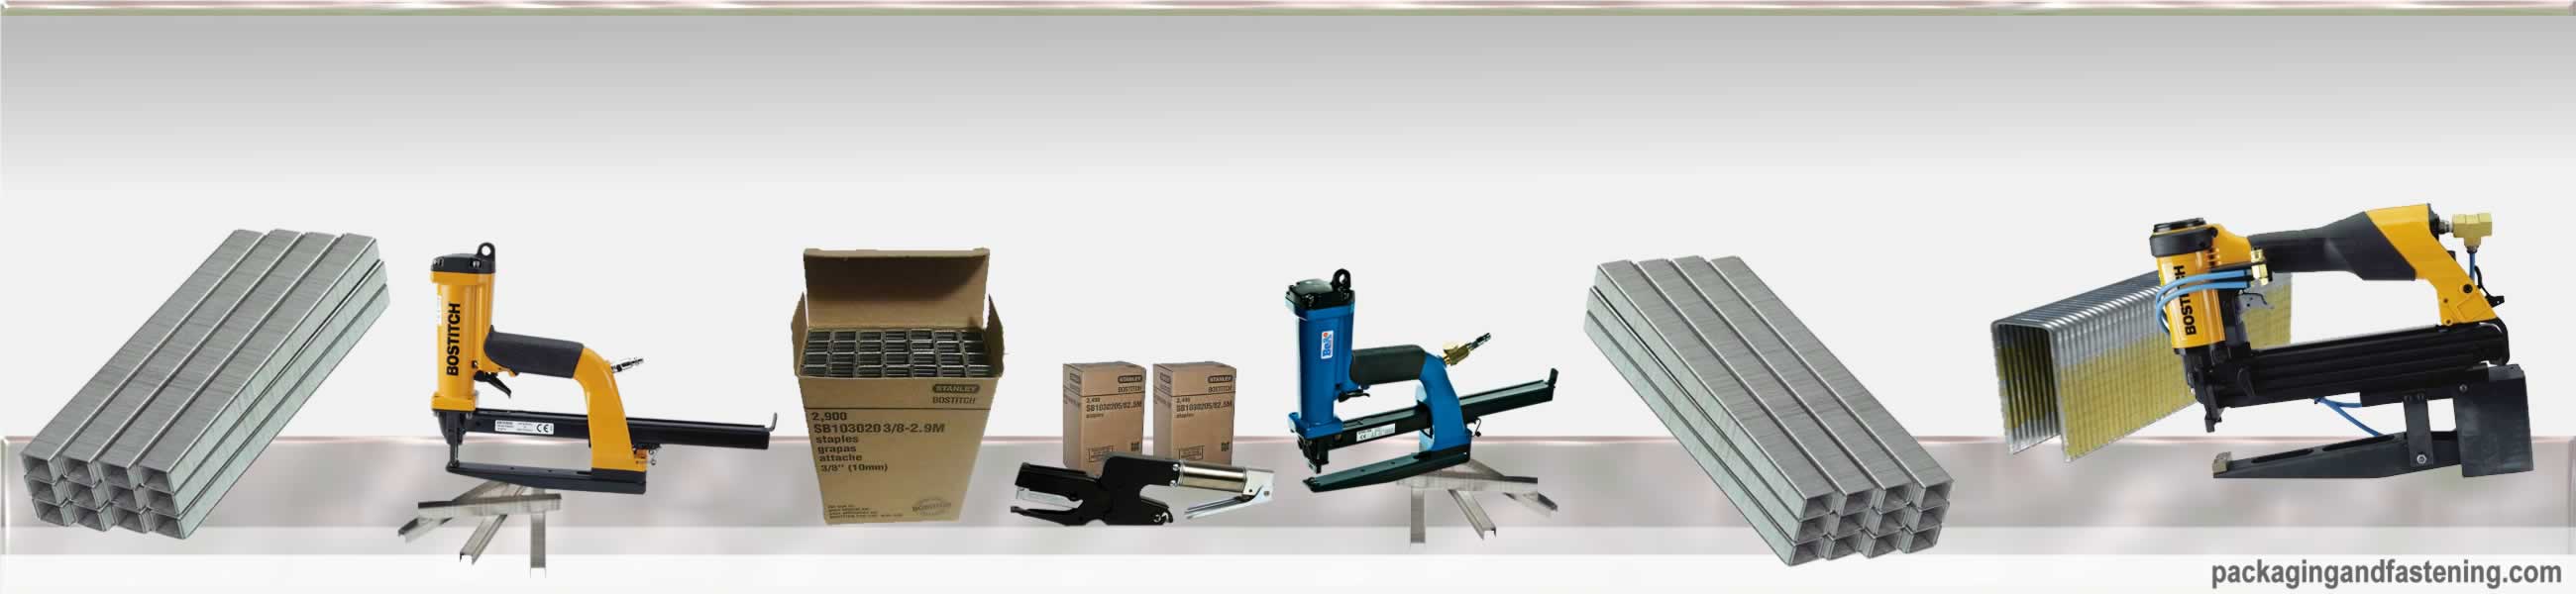 Buy pneumatic plier staplers for single, double and triple wall corrugated boxes at packagingandfastening.com now